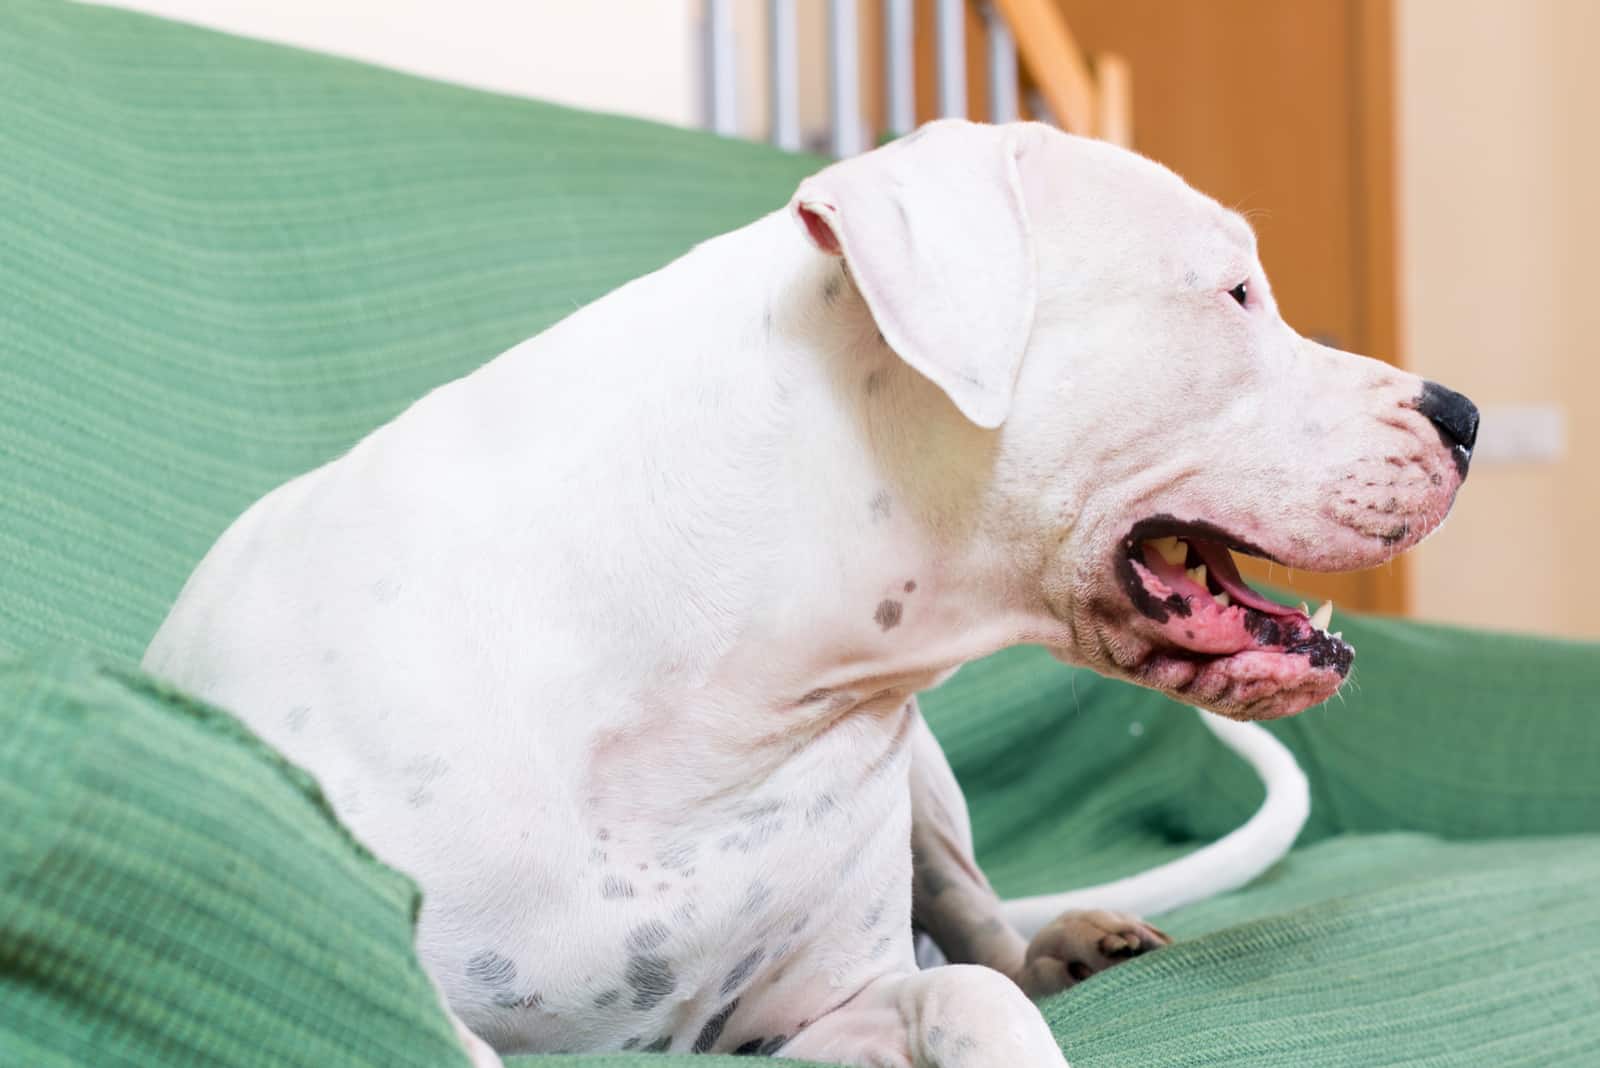 Dogo Argentino lies on the couch and rests